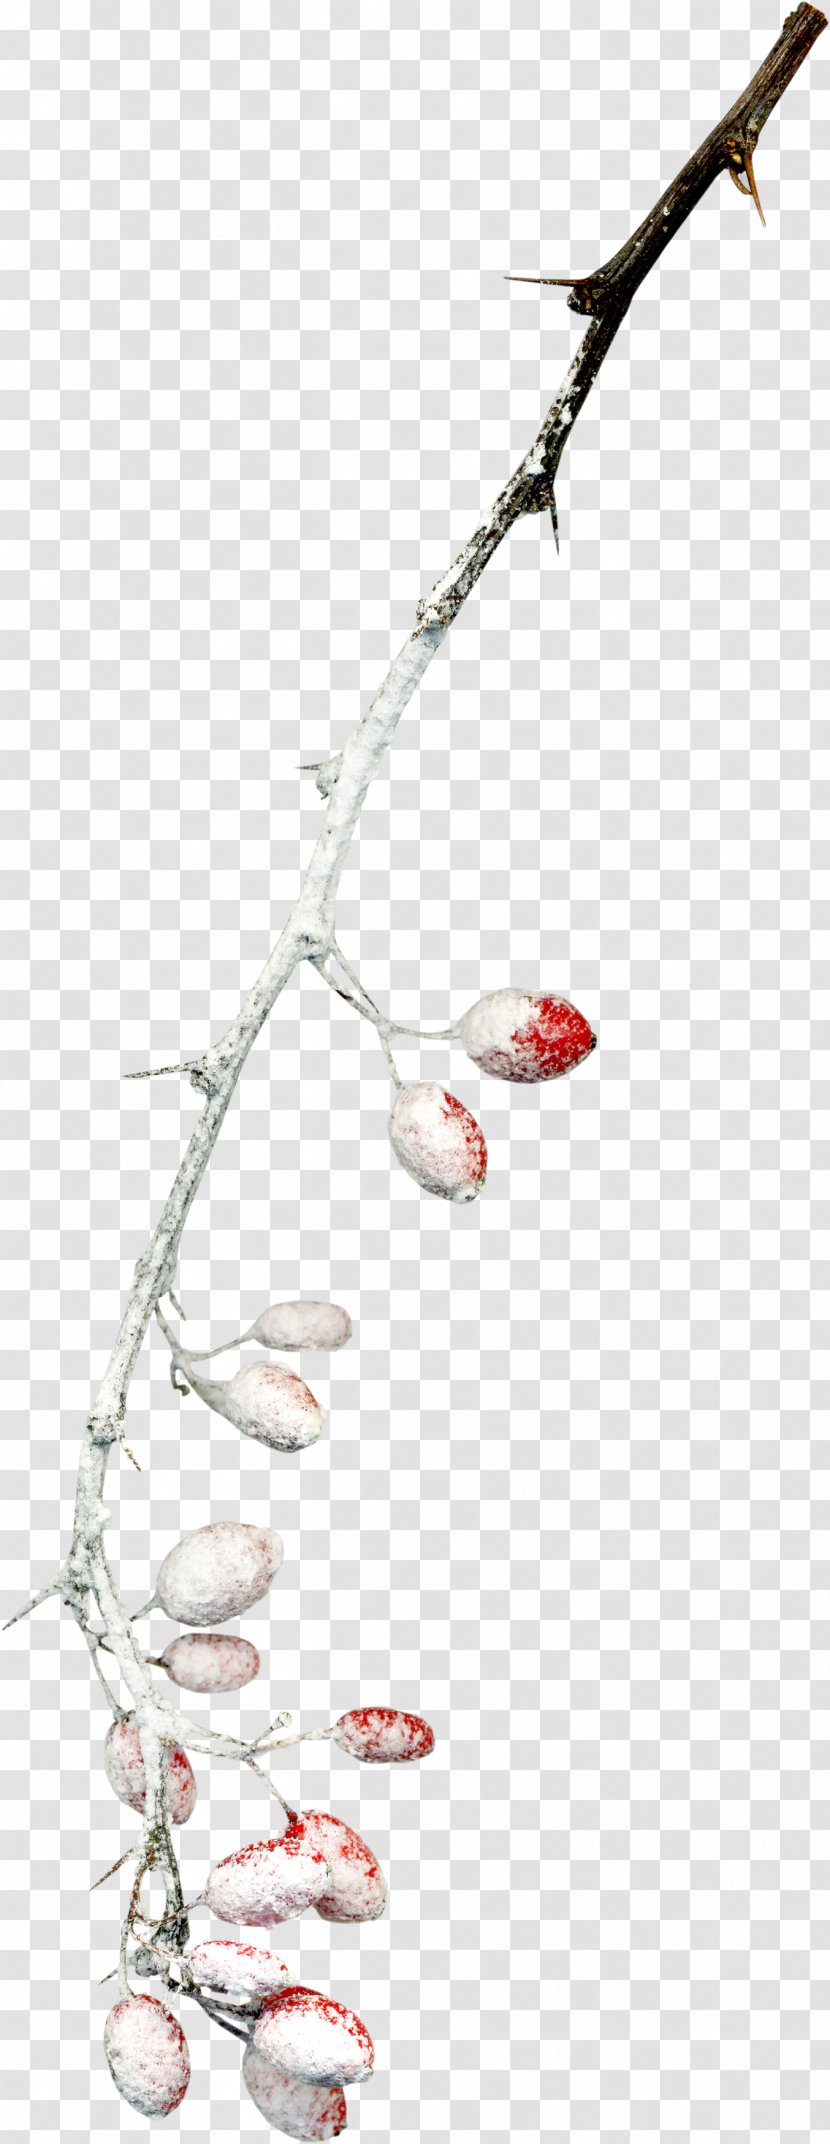 Twig Branch Snow Tree - Snow-covered Branches Transparent PNG